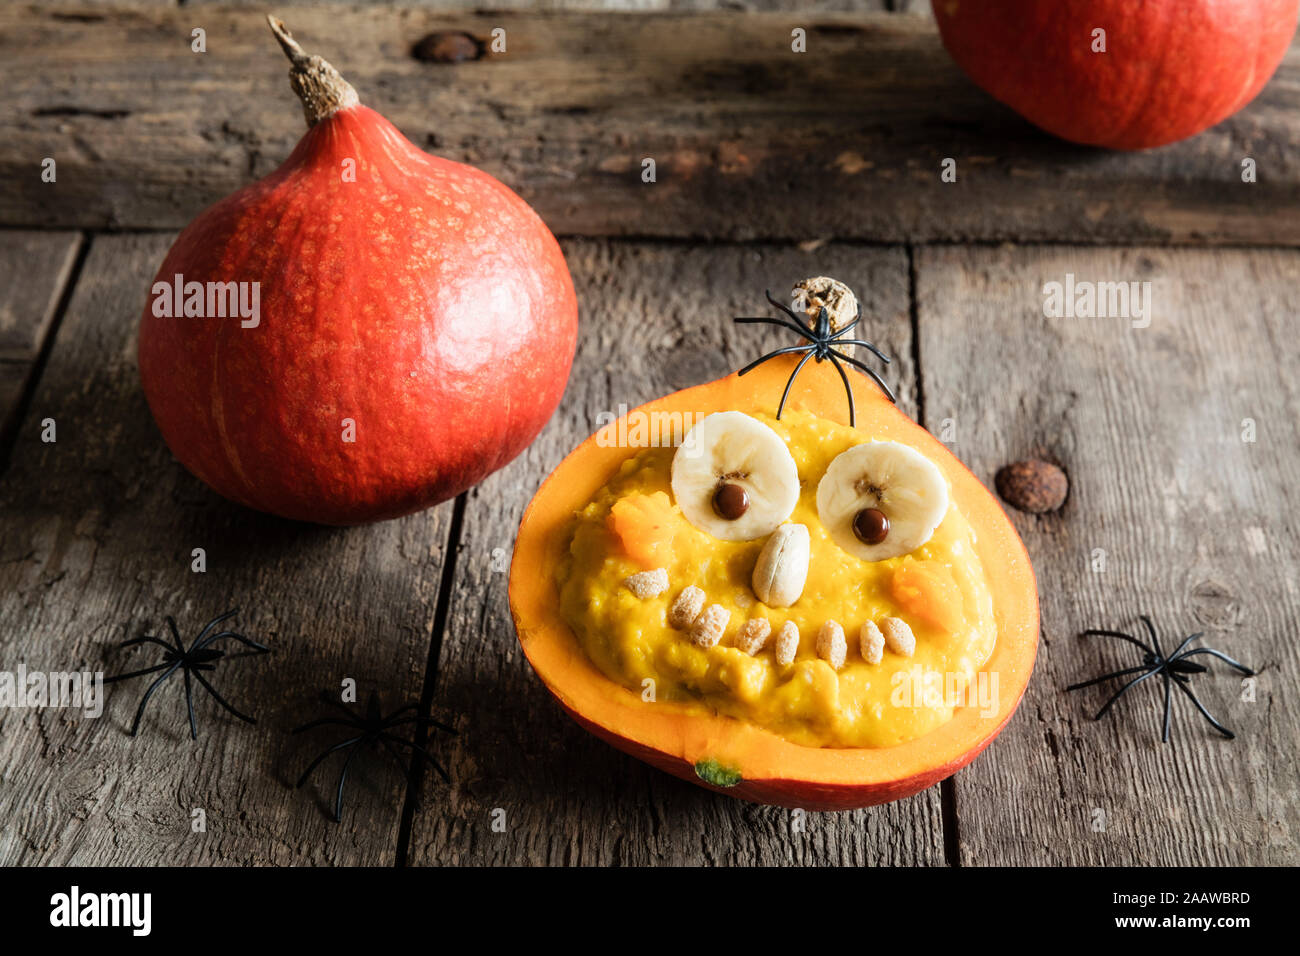 High angle view of pumpkin with anthropomorphic face on wooden table during Halloween Stock Photo